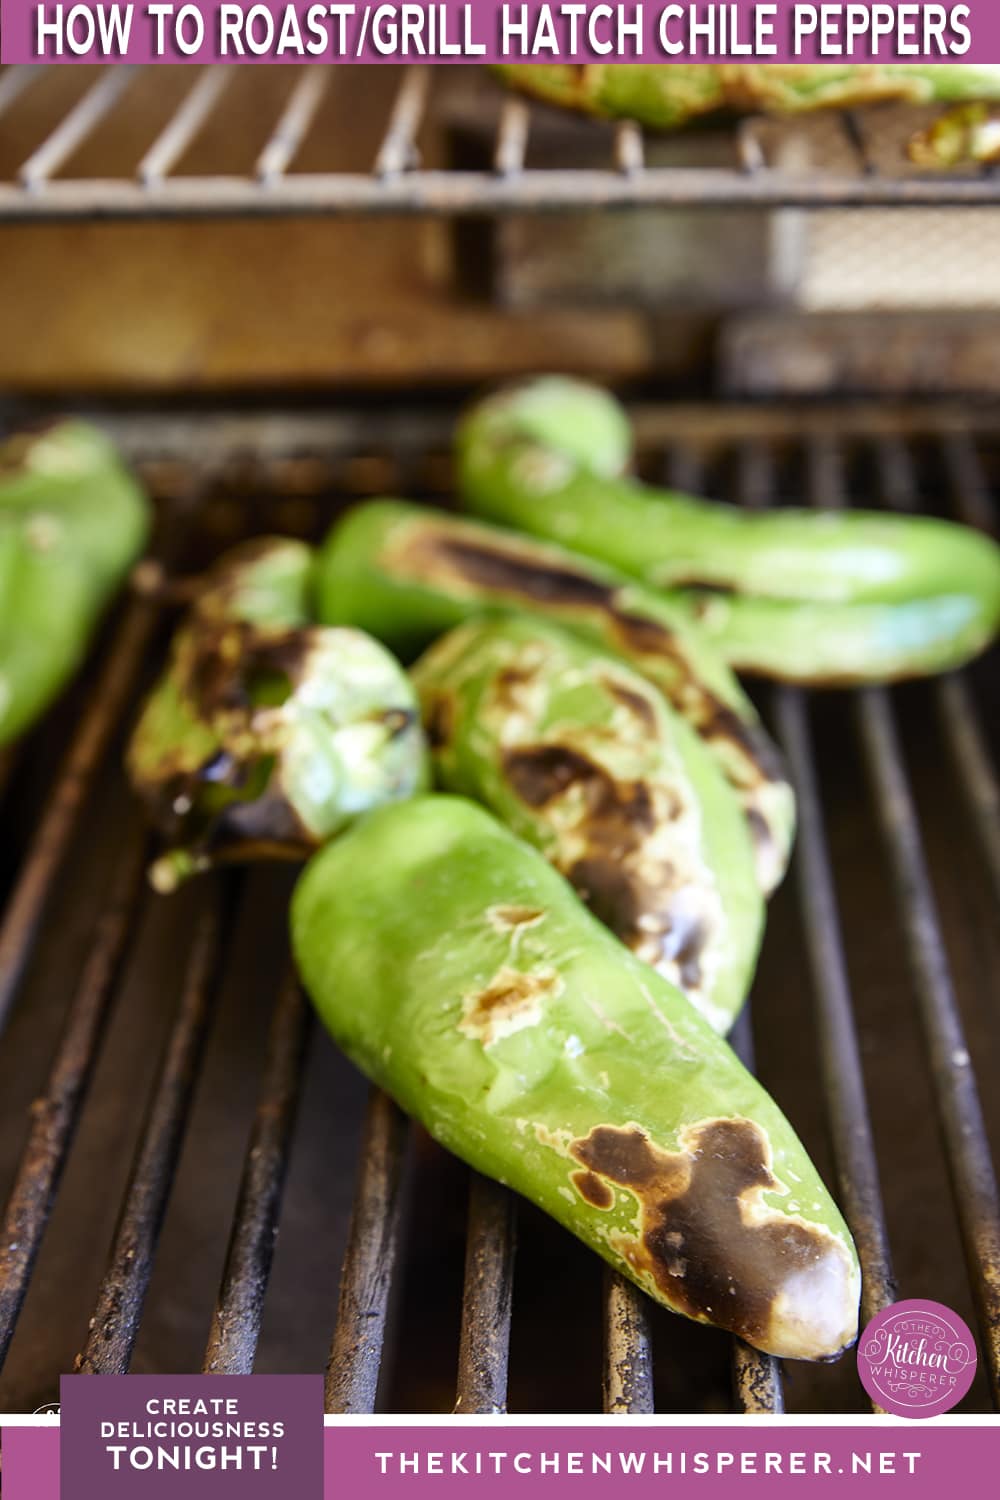 How to Roast Hatch Chile Peppers On the Grill